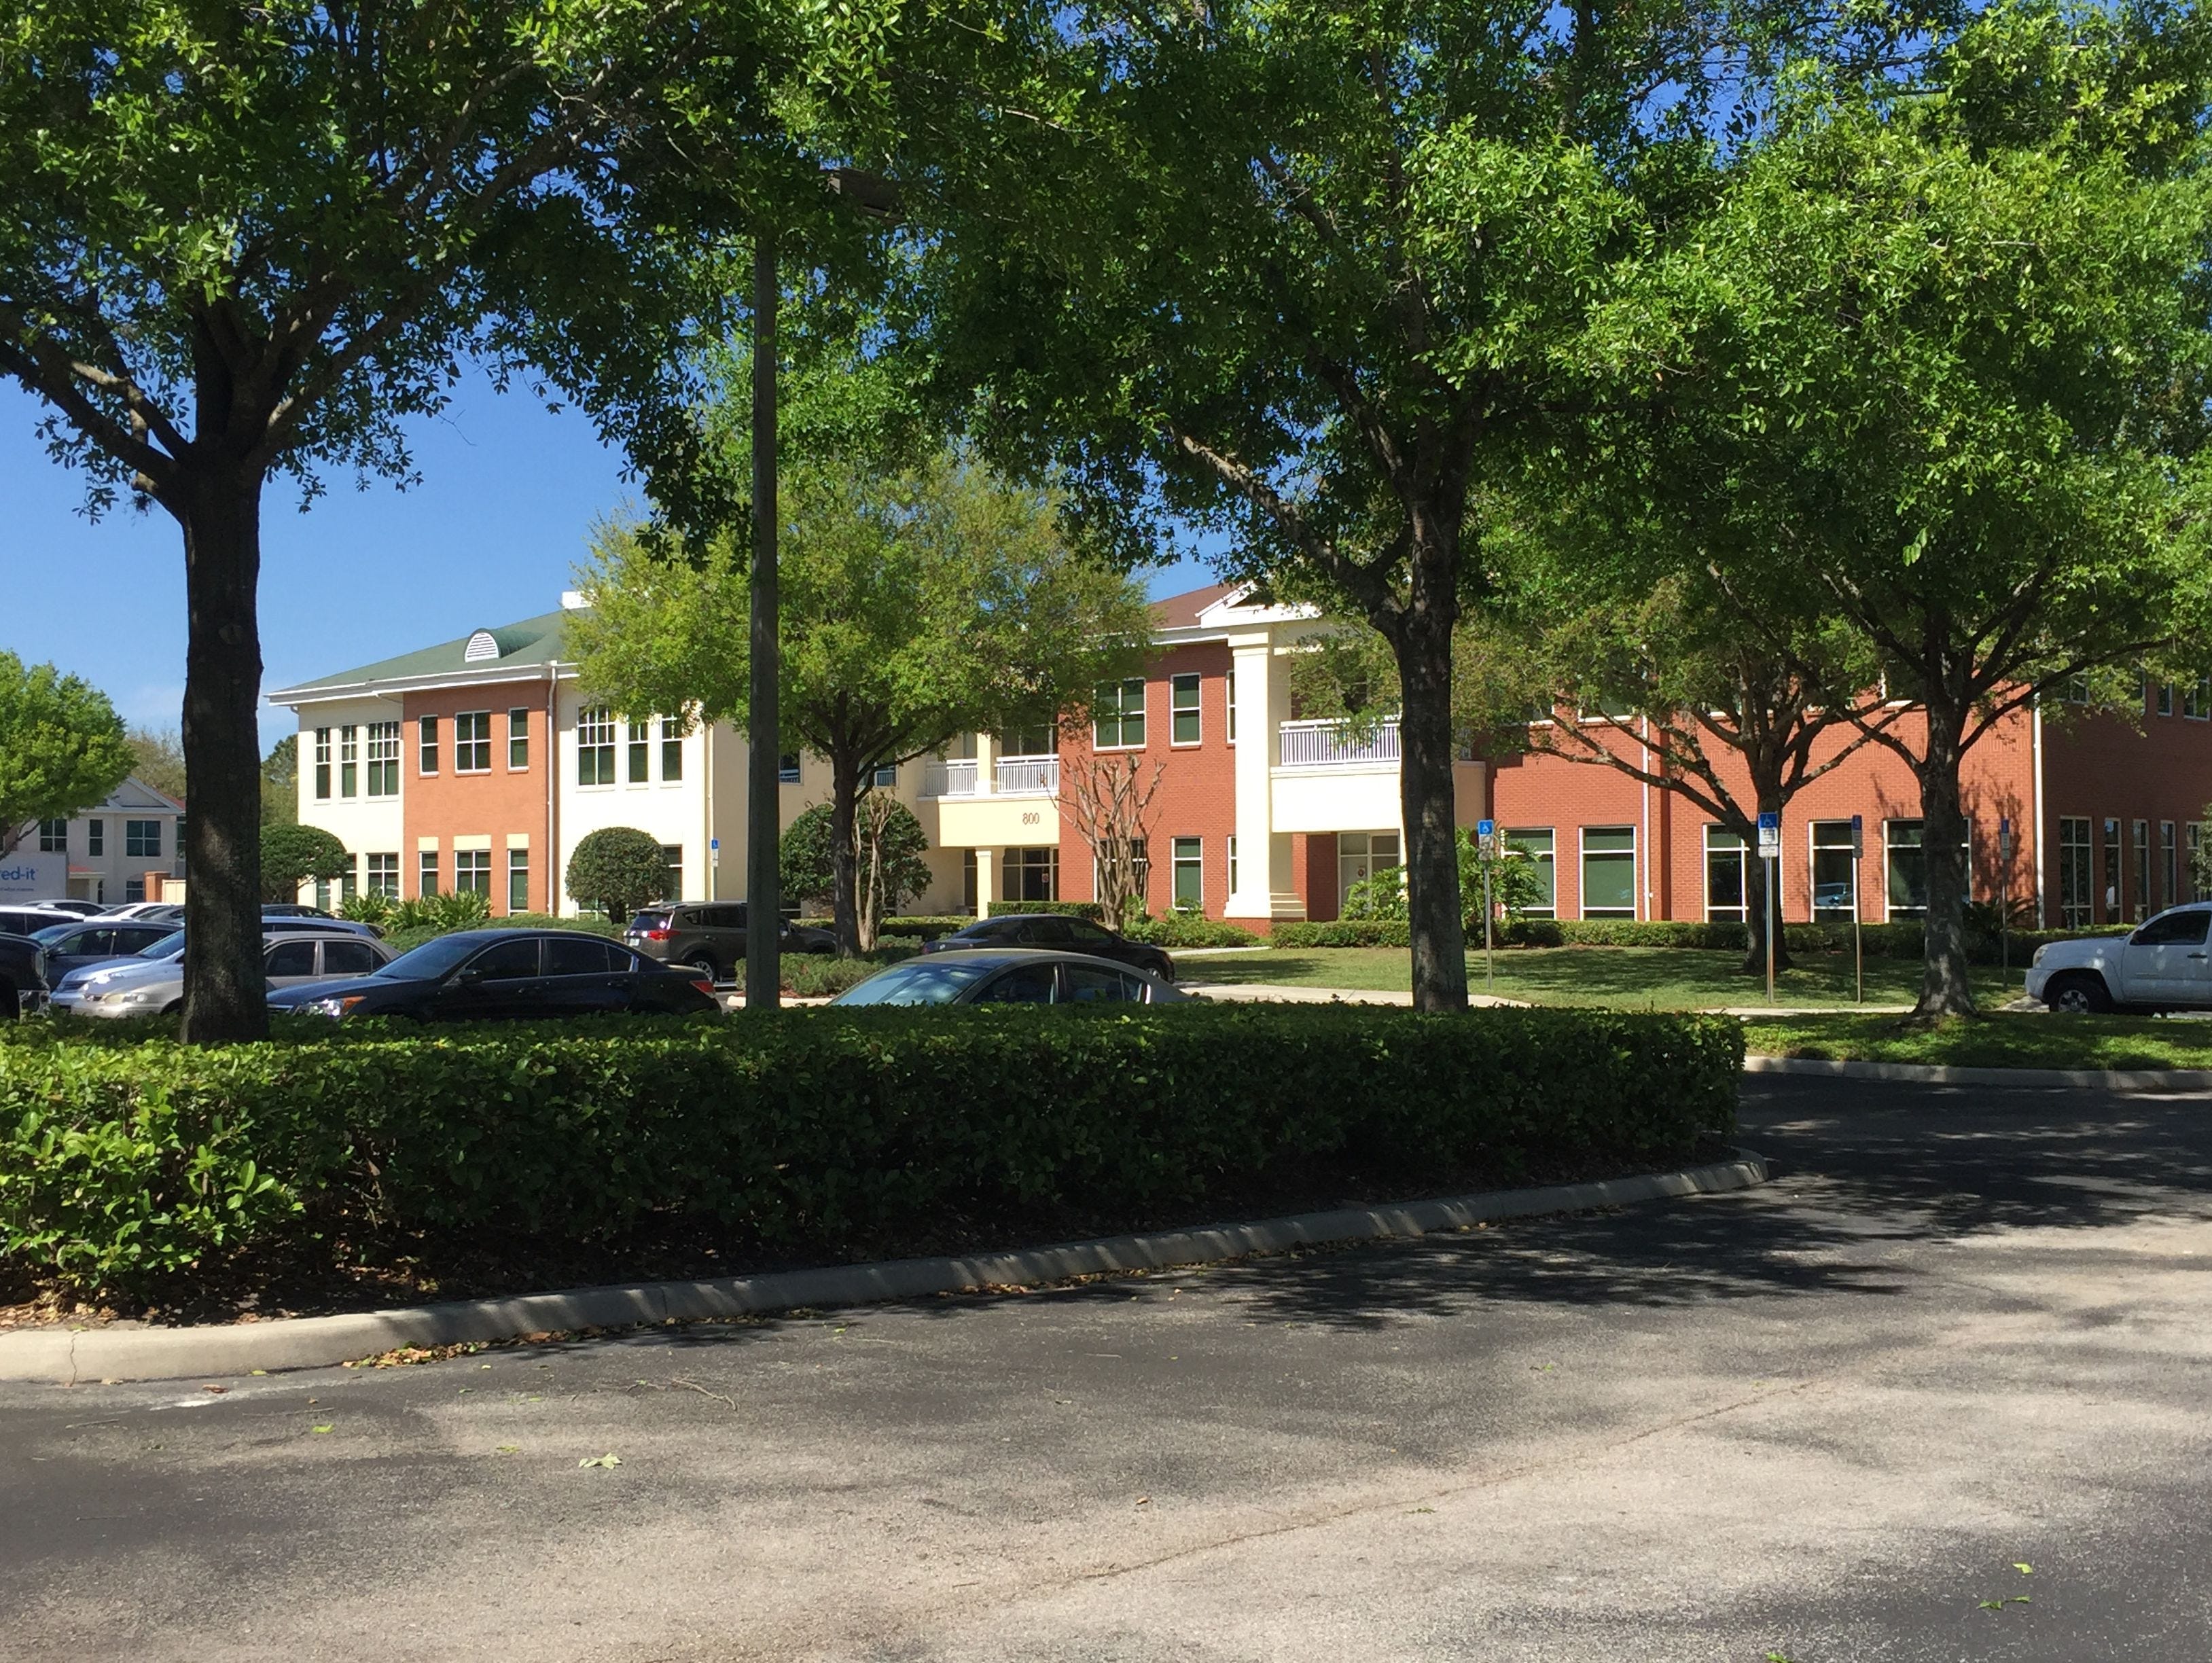 Consulate Health Care headquarters in Maitland, Fla., a suburb of Orlando. Consulate nursing homes systematically abused and neglected patients to boost profits, according to a whistleblower lawsuit.